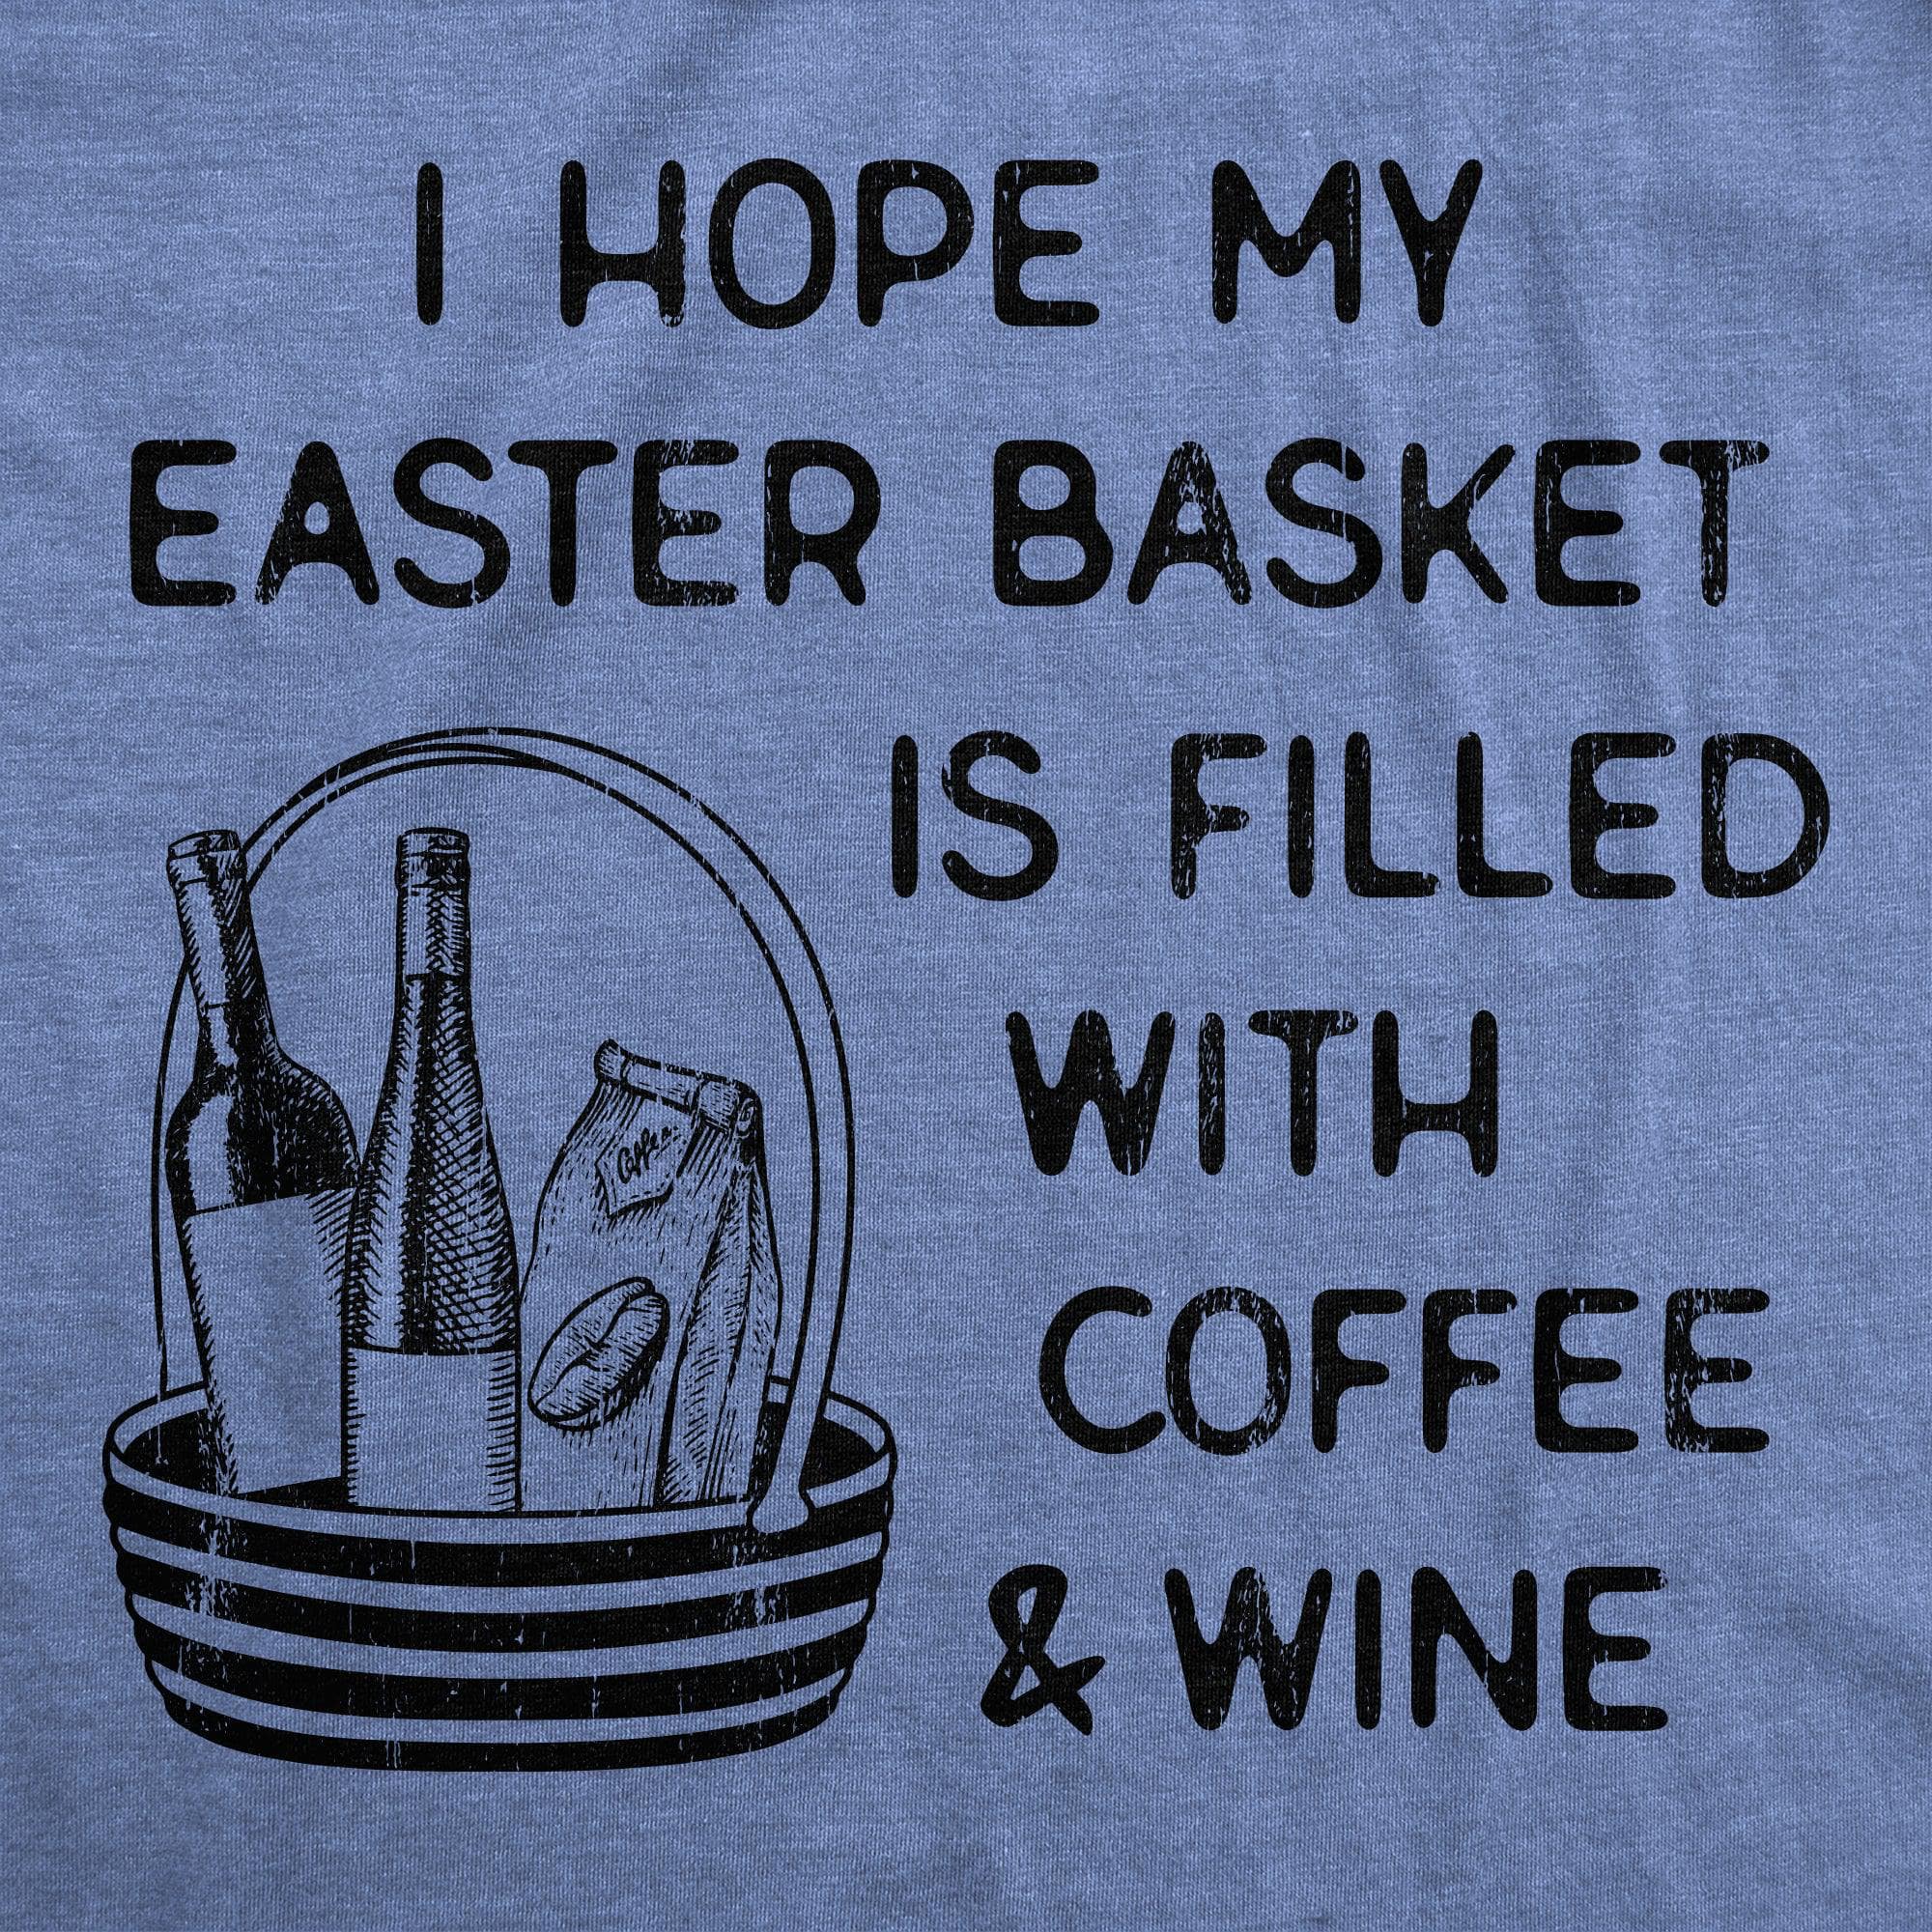 I Hope My Easter Basket Is Filled With Coffee And Wine Men's Tshirt  -  Crazy Dog T-Shirts